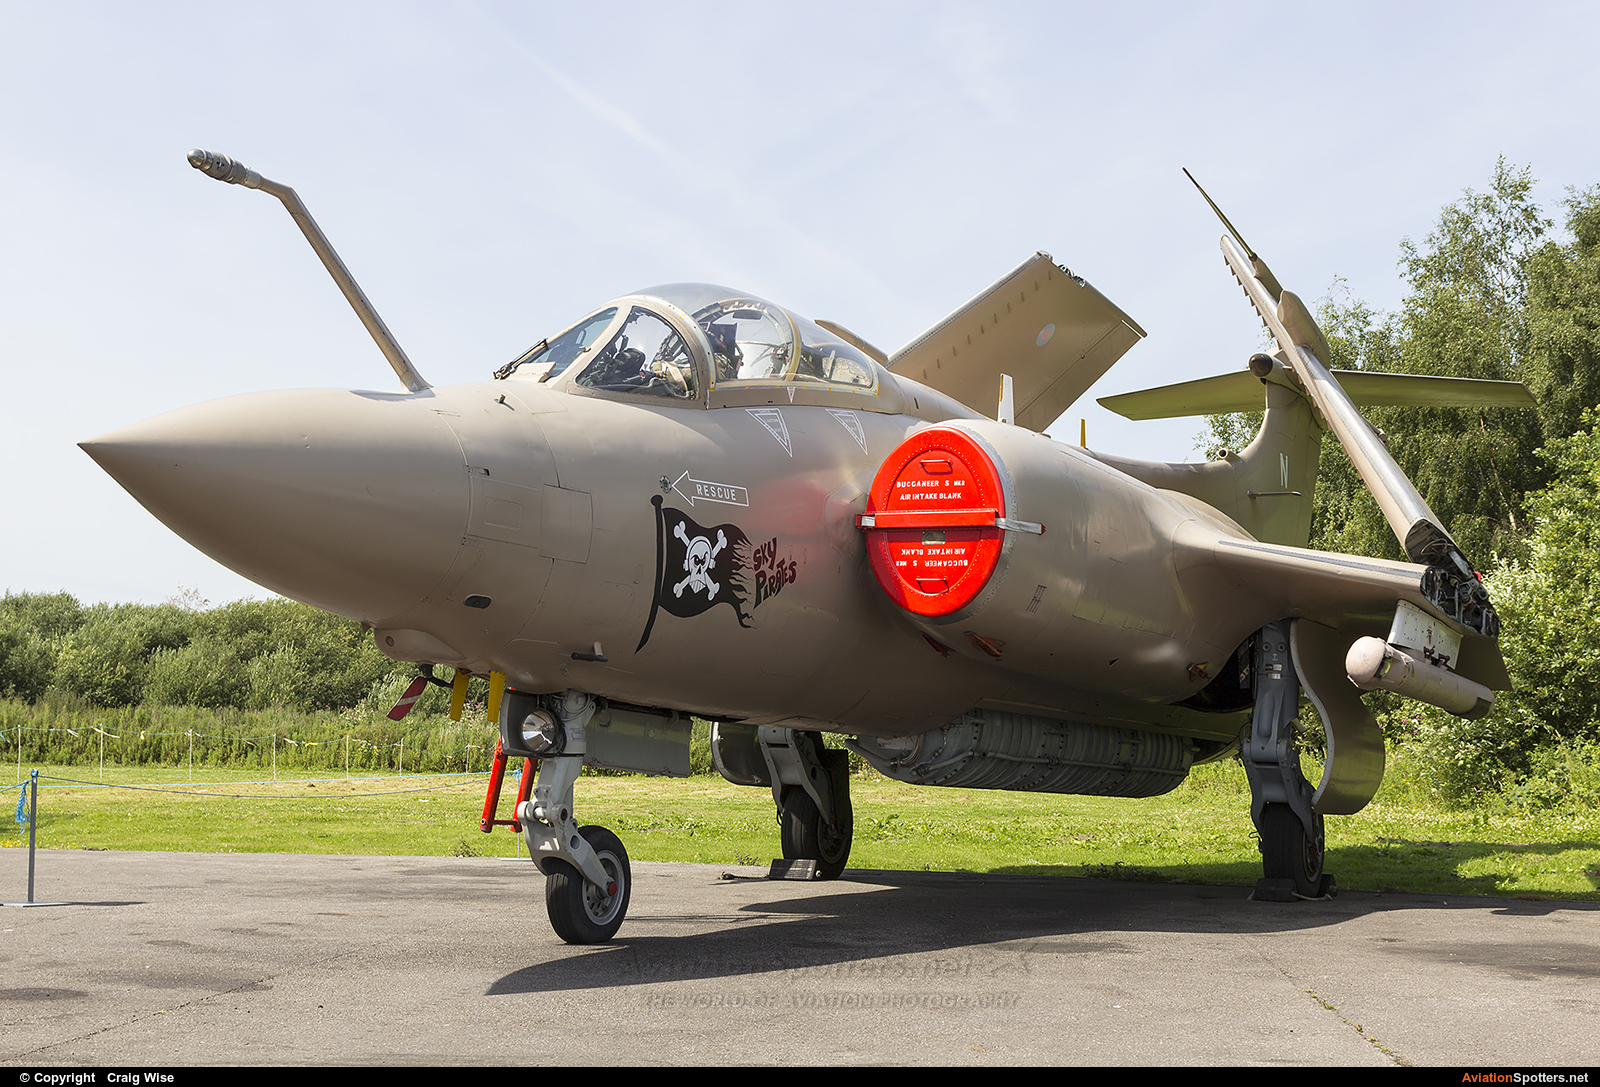   Buccaneer S.2B  (XX901) By Craig Wise (Tigger Bounce)